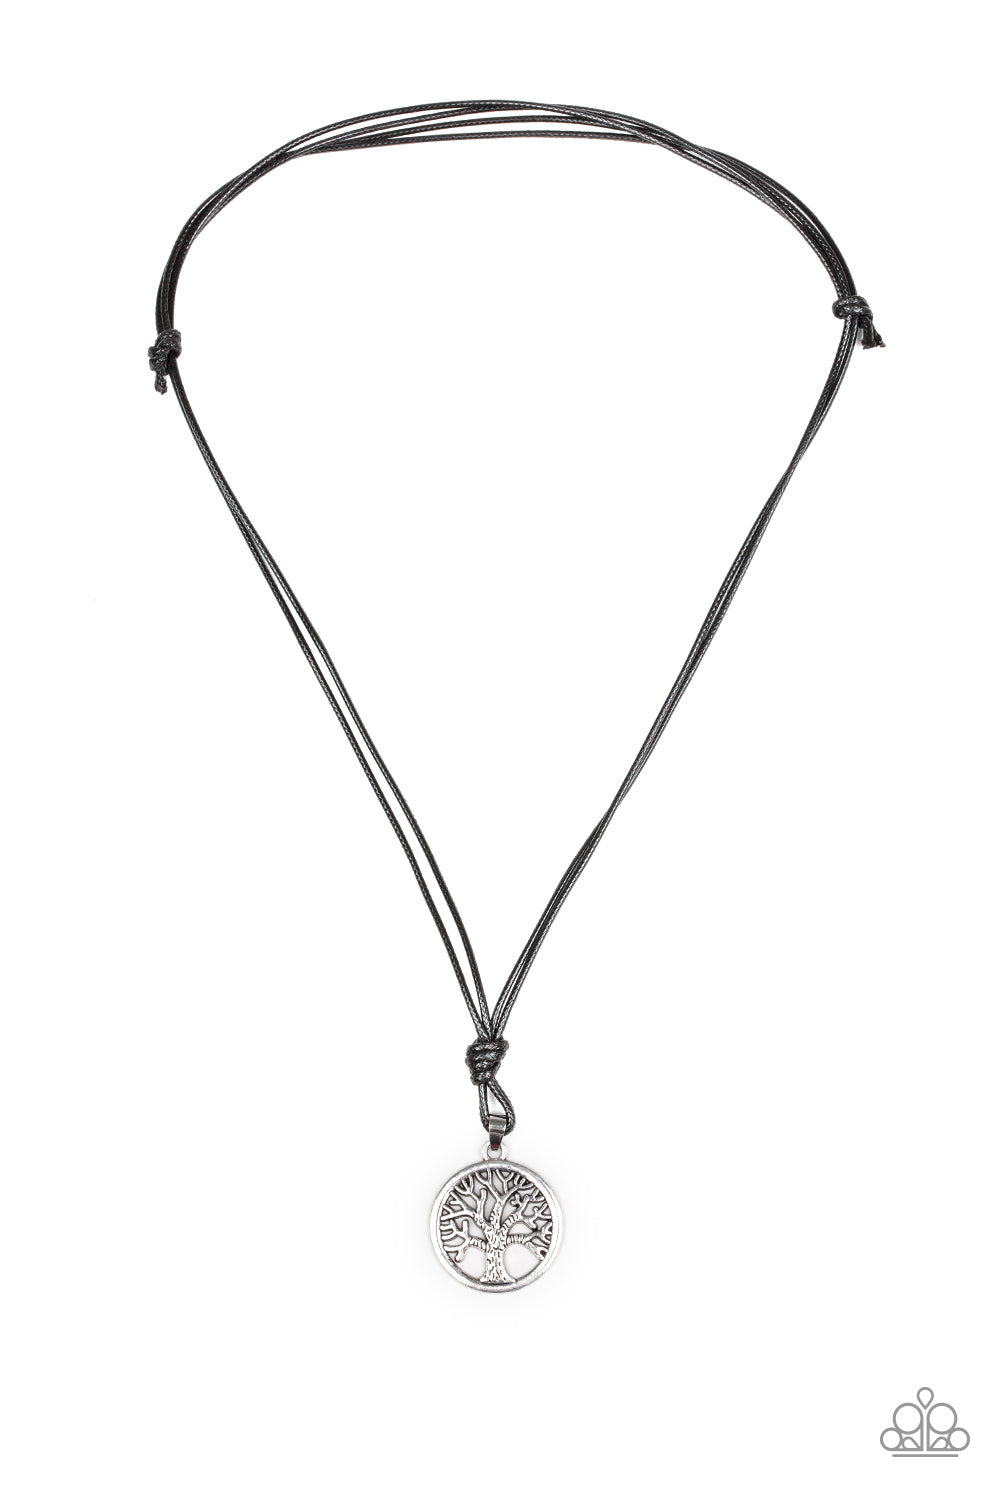 Rural Roots - Silver Urban Necklace